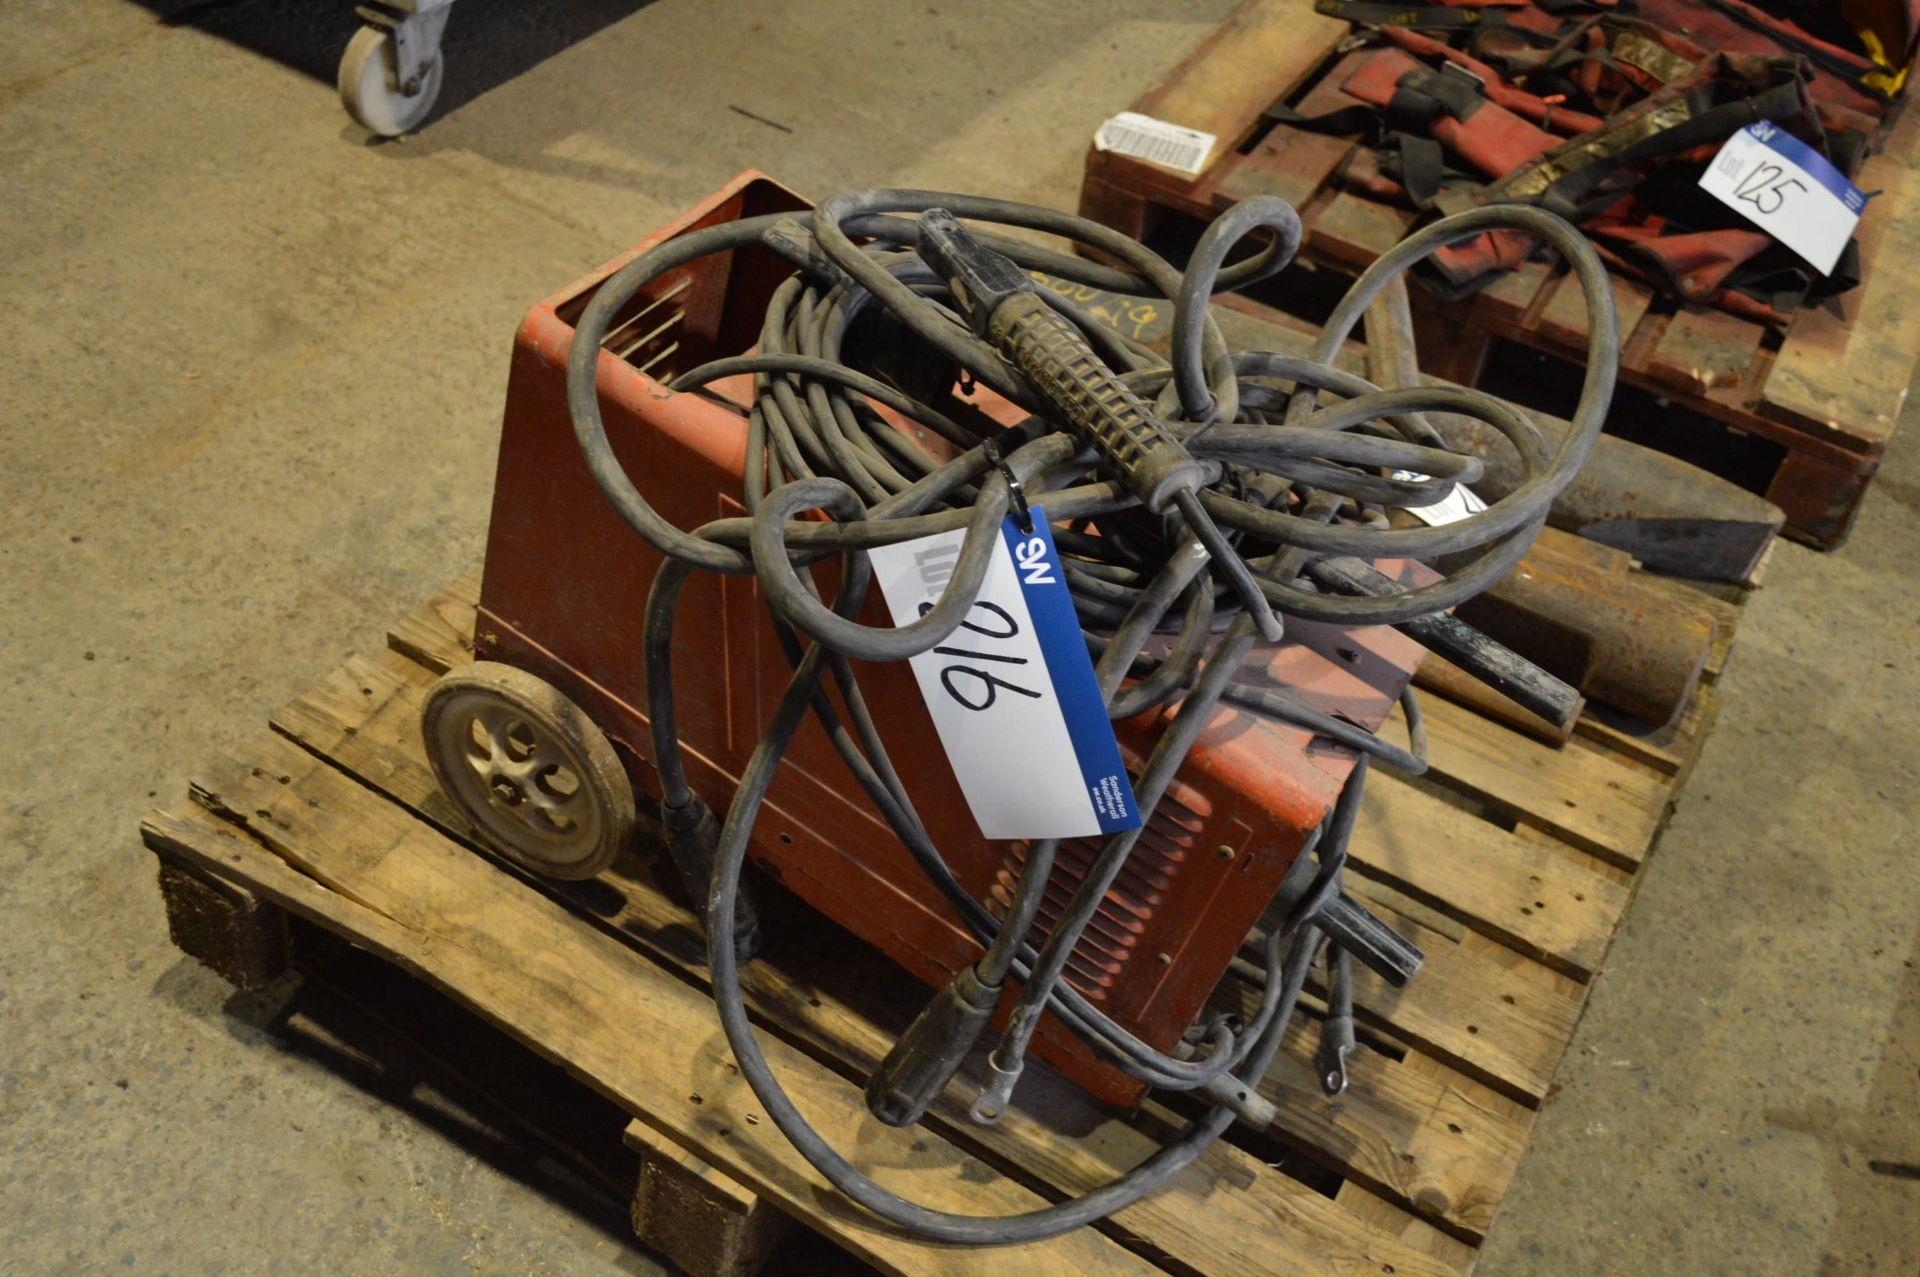 Sealey Power Weld 210 XT Arc Welder, three phase with leads and electrode holder